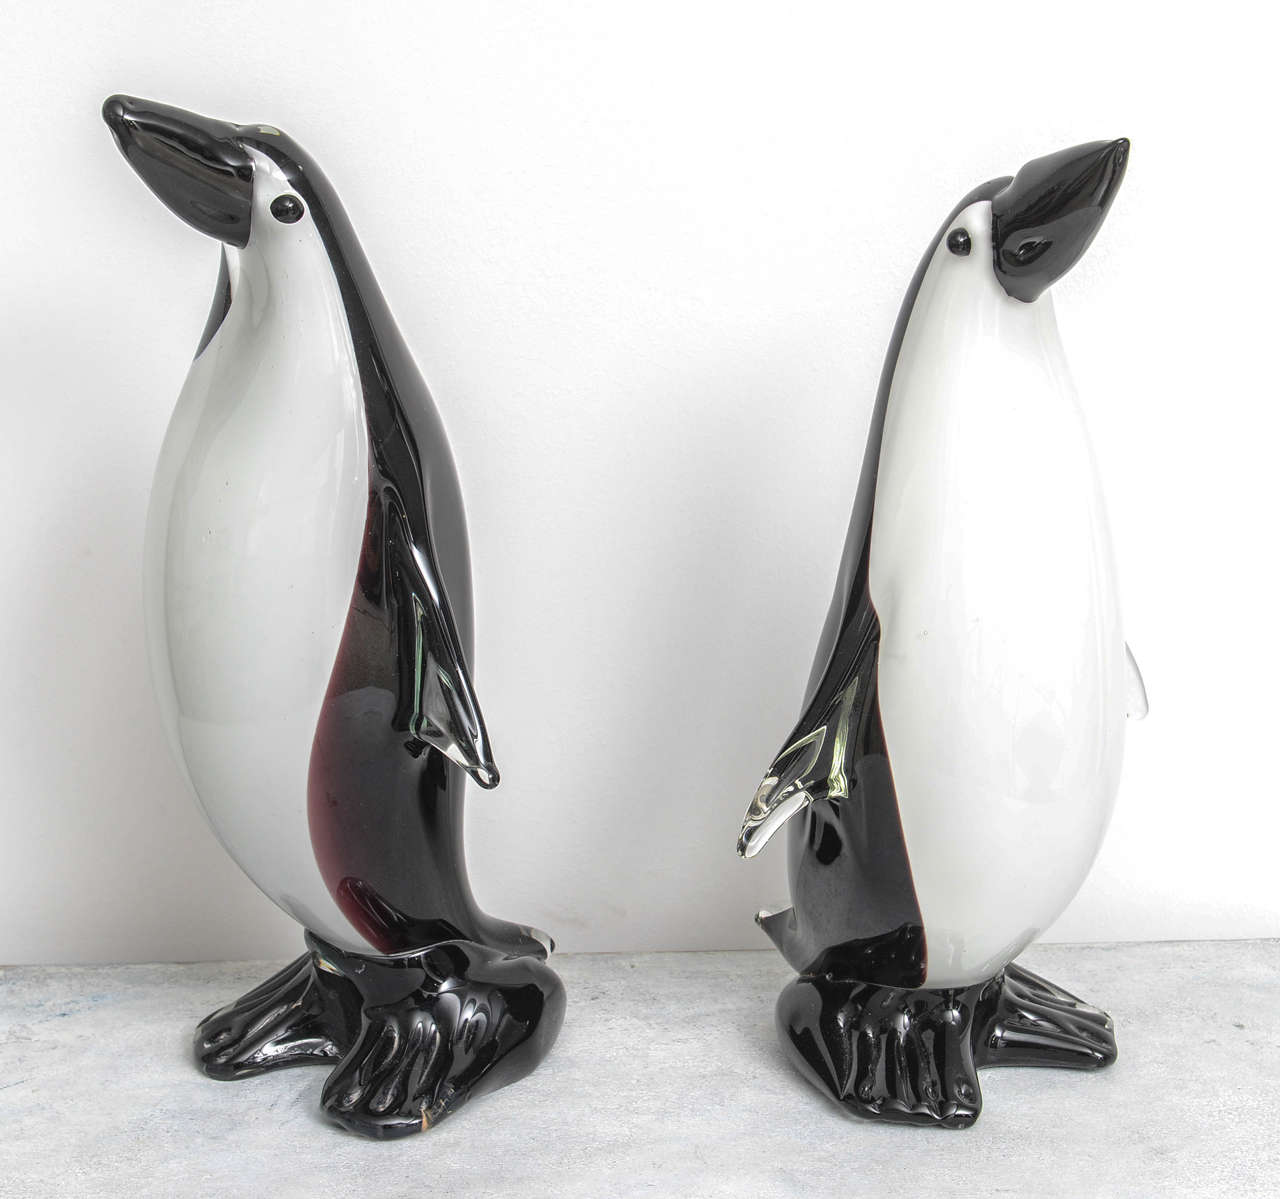 Pair of Vintage Black and White Murano Glass Style, Large Scale Penguins Figures.
Shorter Penguin Measures 17.5